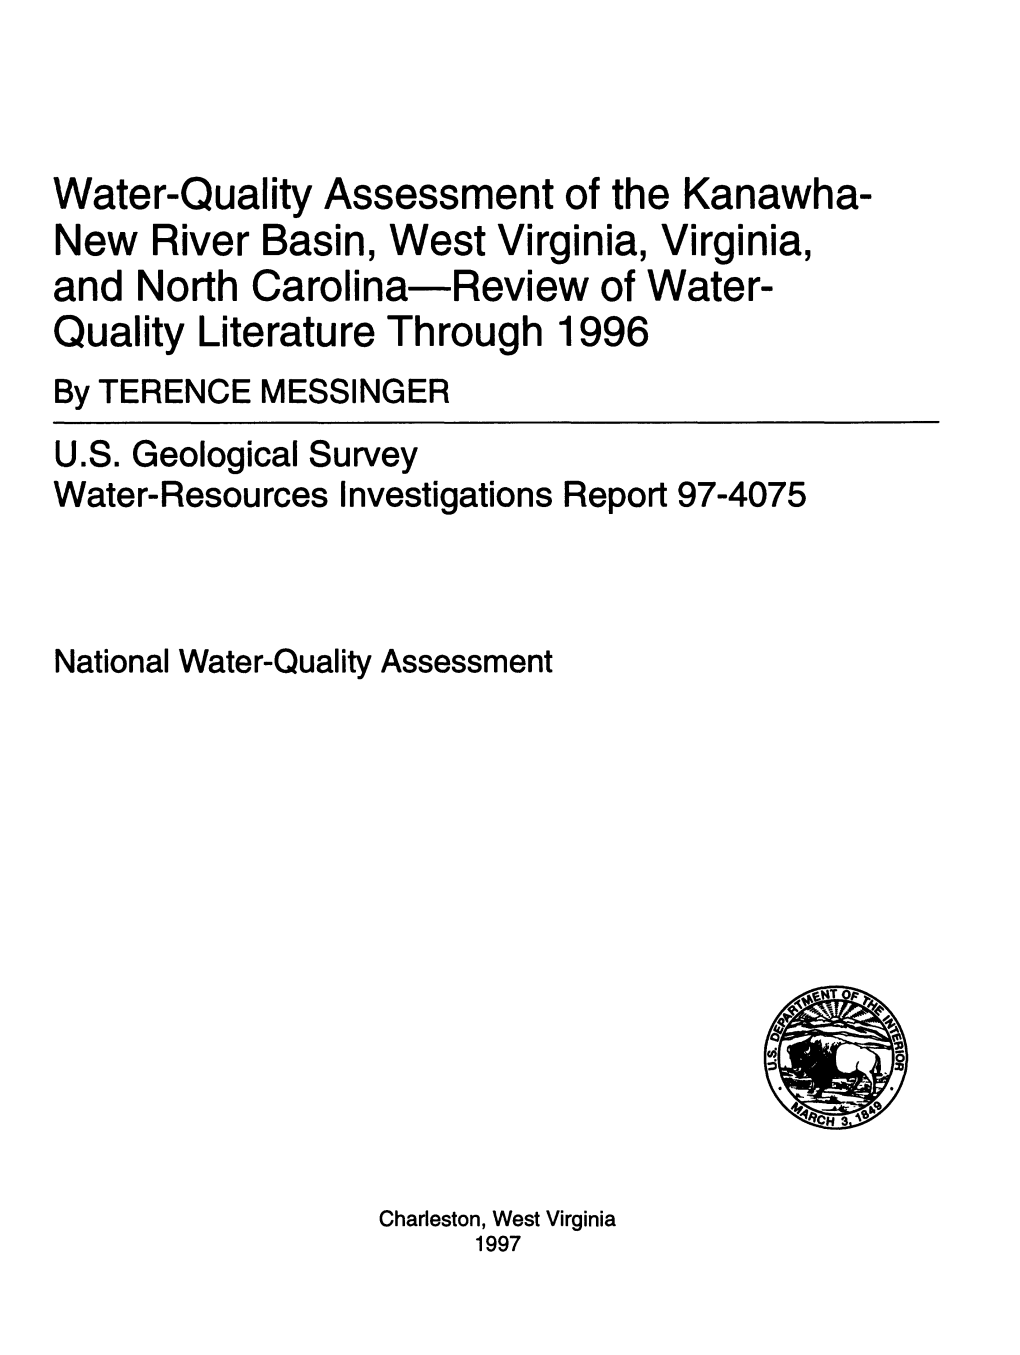 Water-Quality Assessment of the Kanawha New River Basin, West